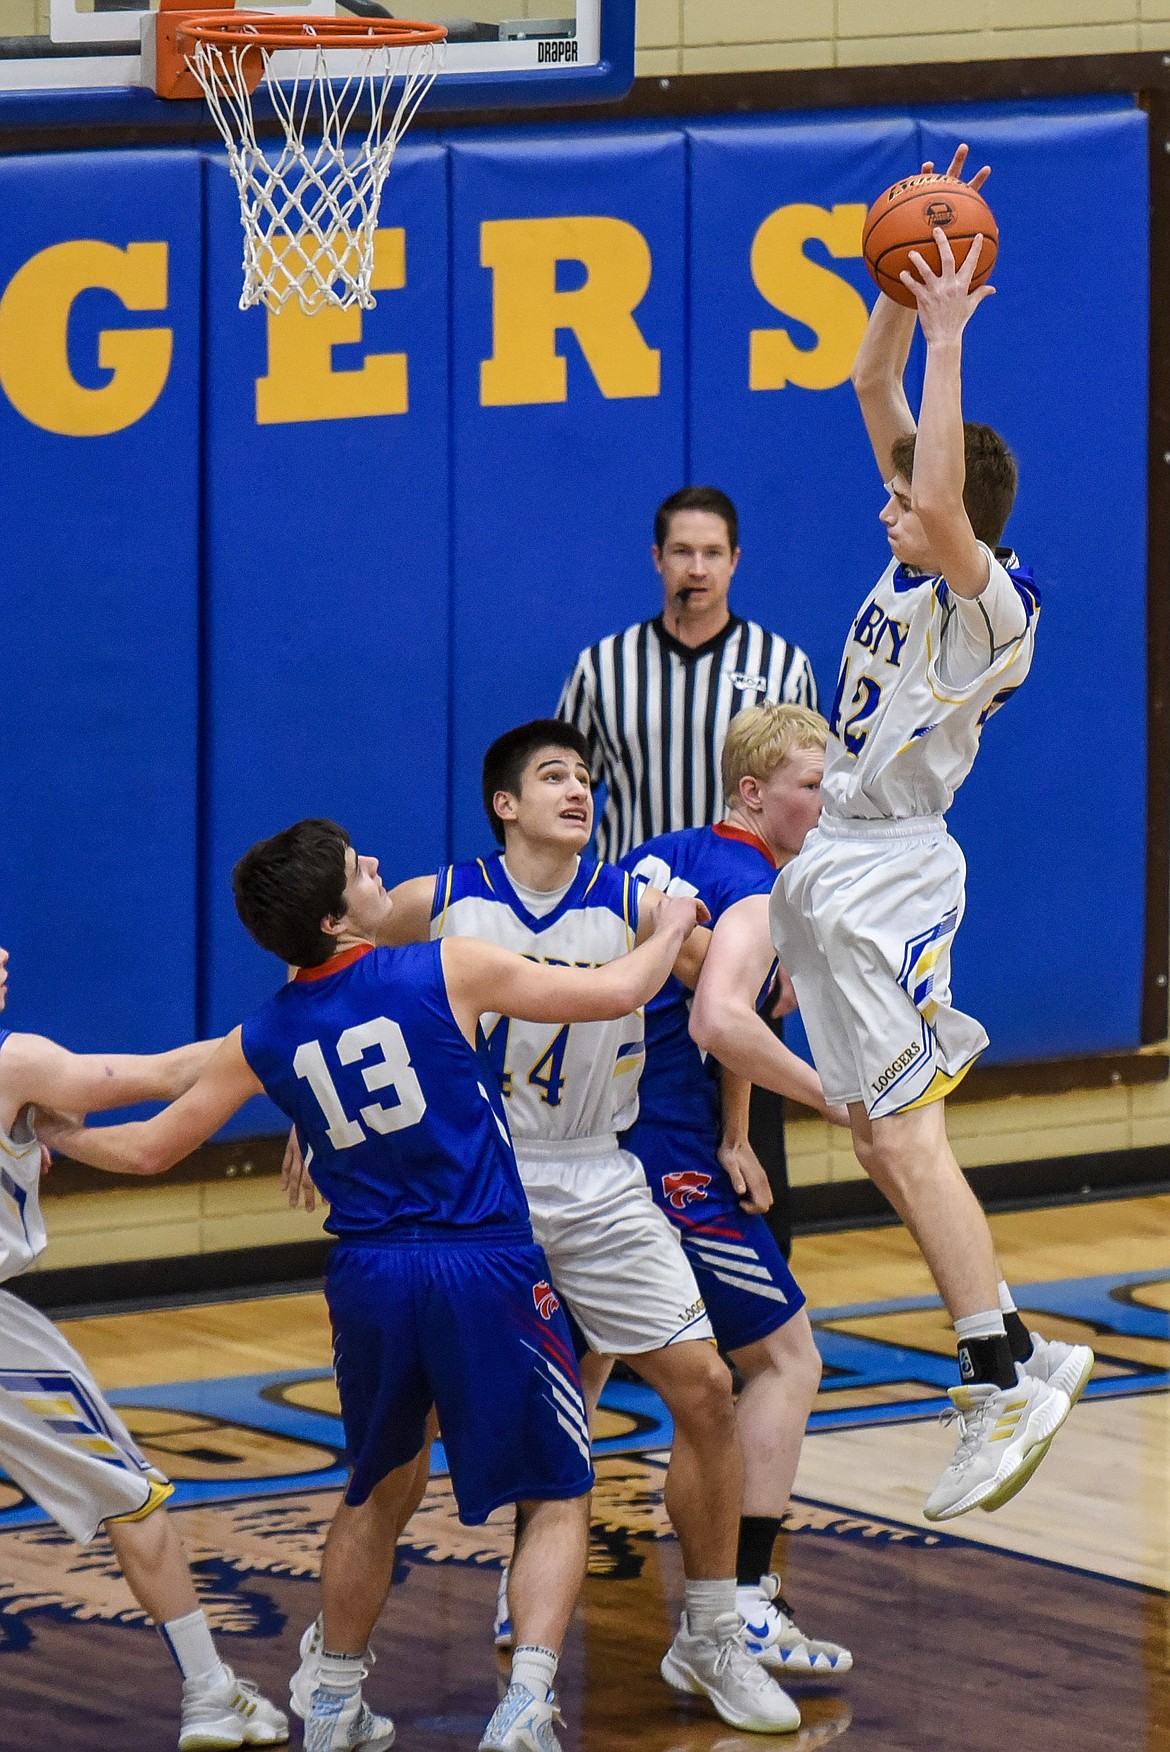 Libby junior Keith Johnson goes high to make a the rebound early in the first quarter Friday against Columbia Falls. (Ben Kibbey/The Western News)